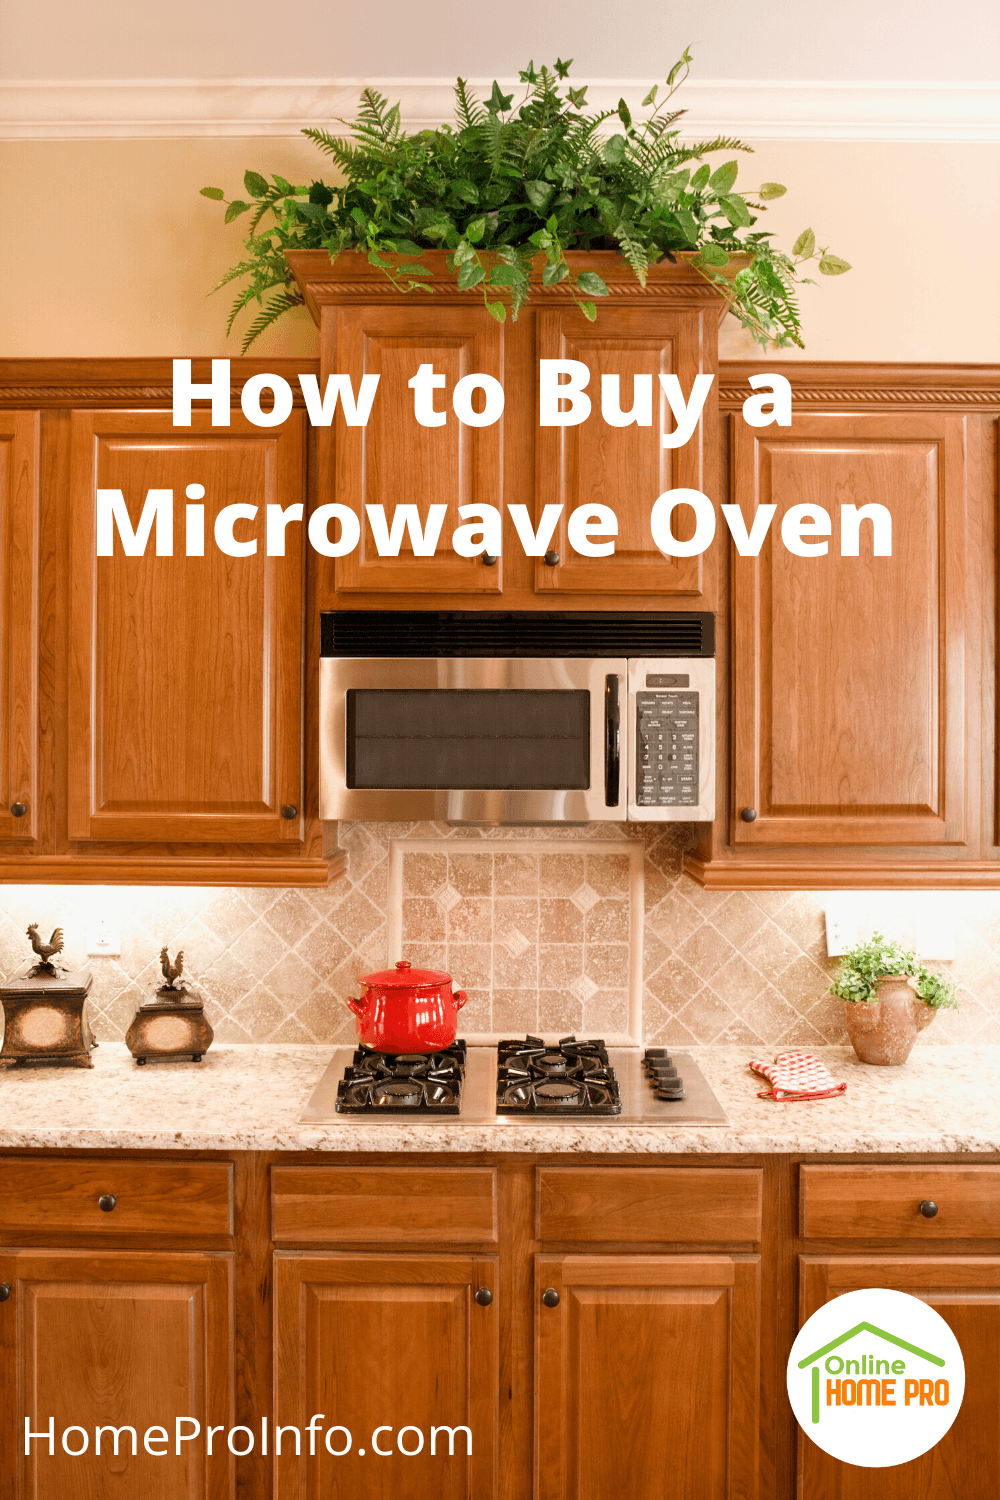 How to Buy a Microwave Oven